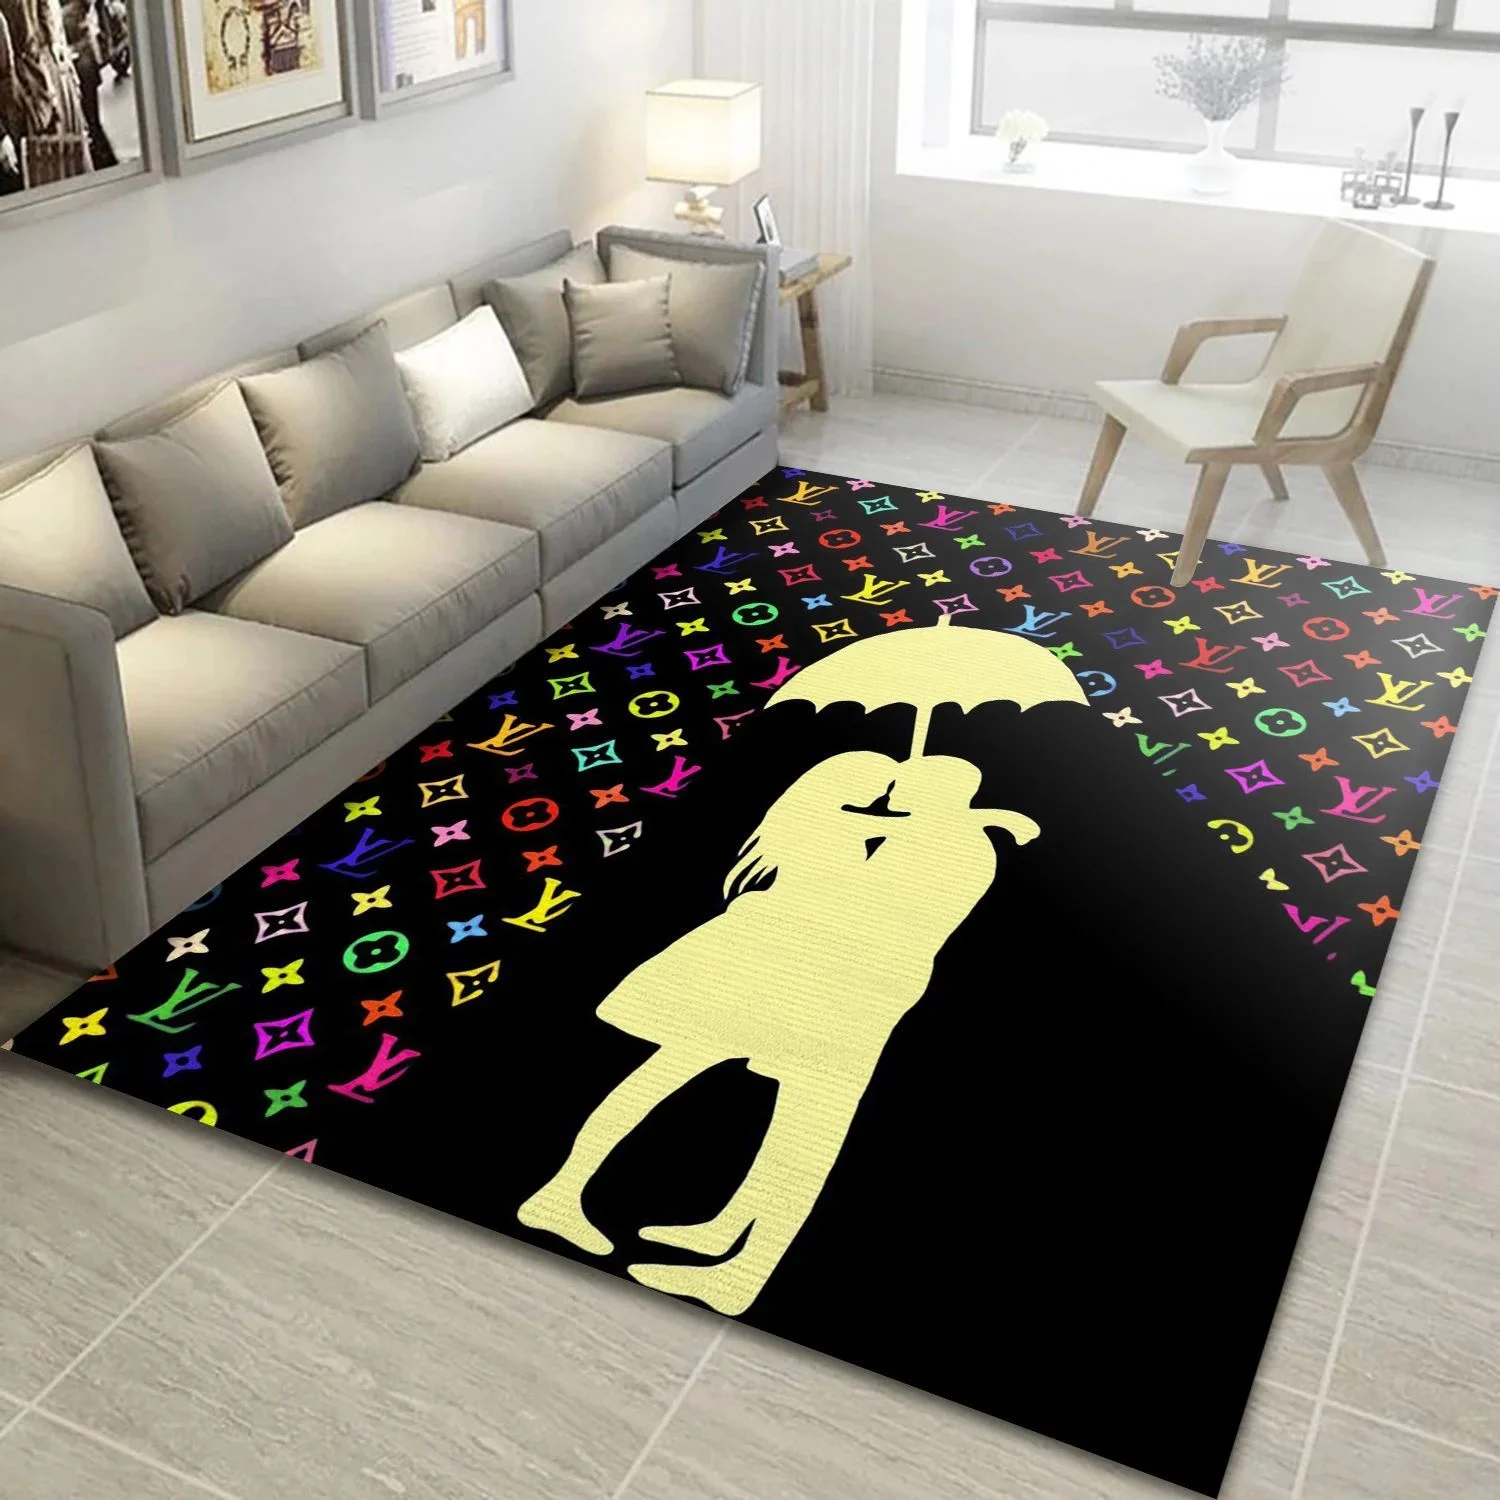 Louis vuitton area rug for gift bedroom rug us gift decor - large